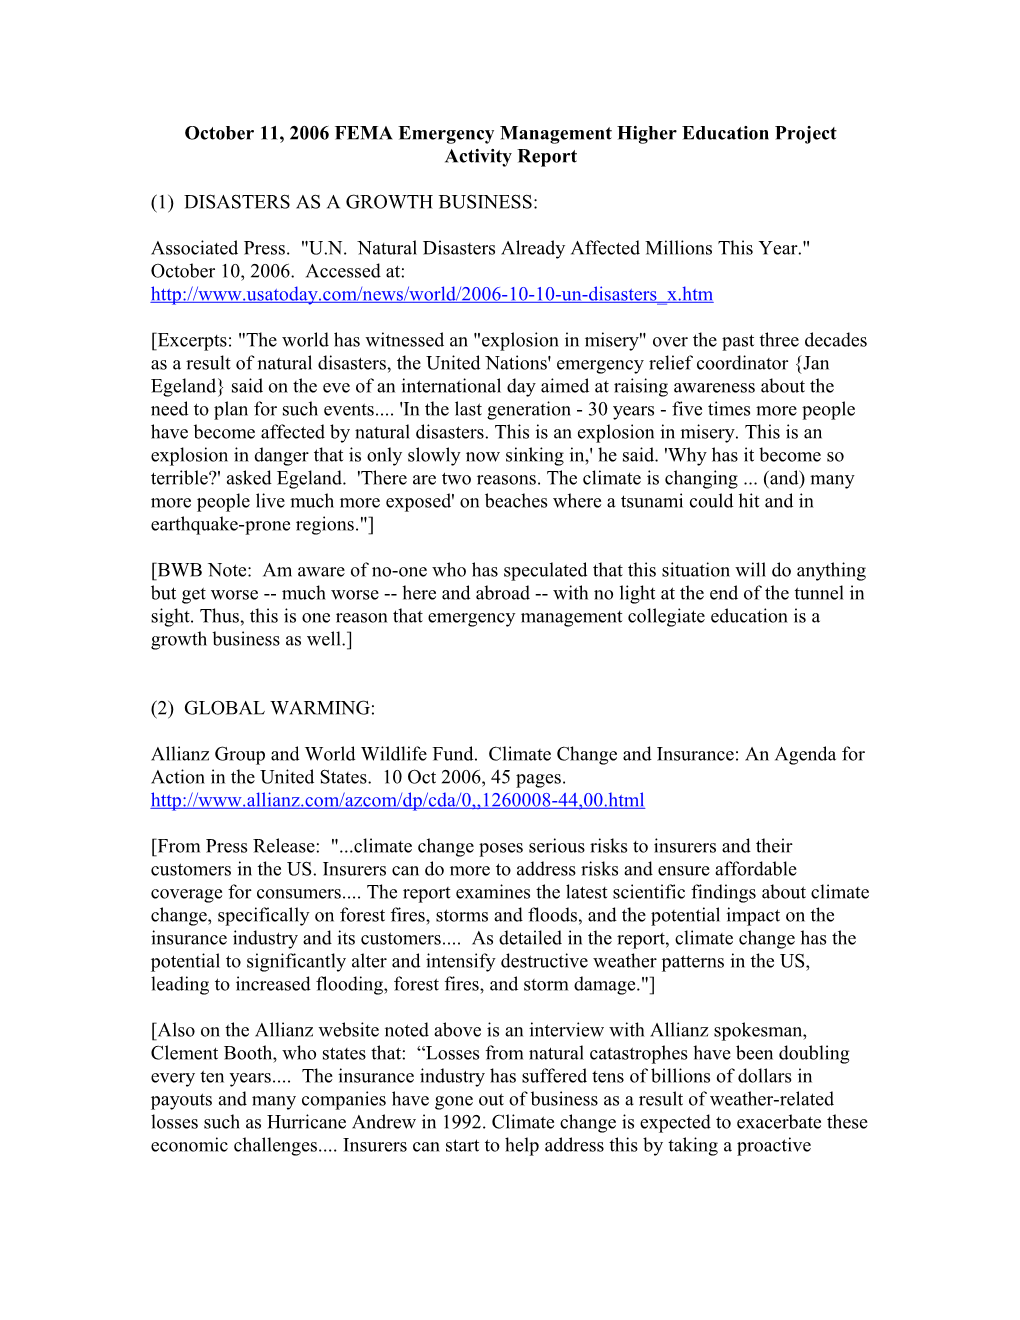 October 11, 2006 FEMA Emergency Management Higher Education Project Activity Report